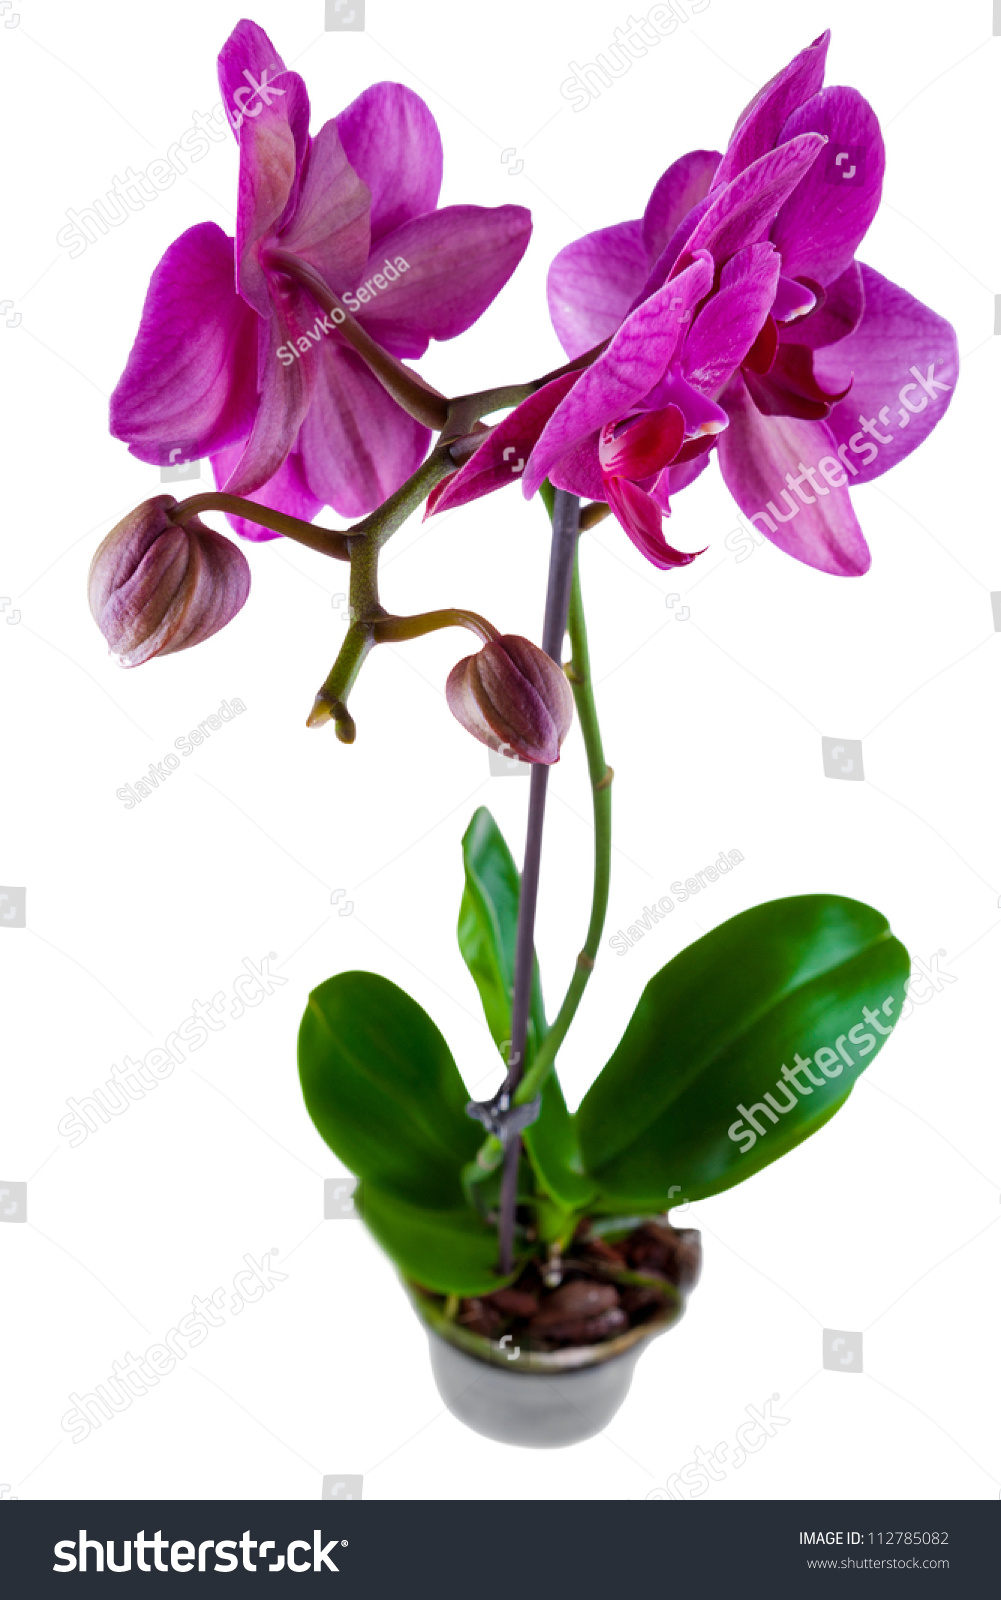 violet orchid in a pot isolated on white background #112785082